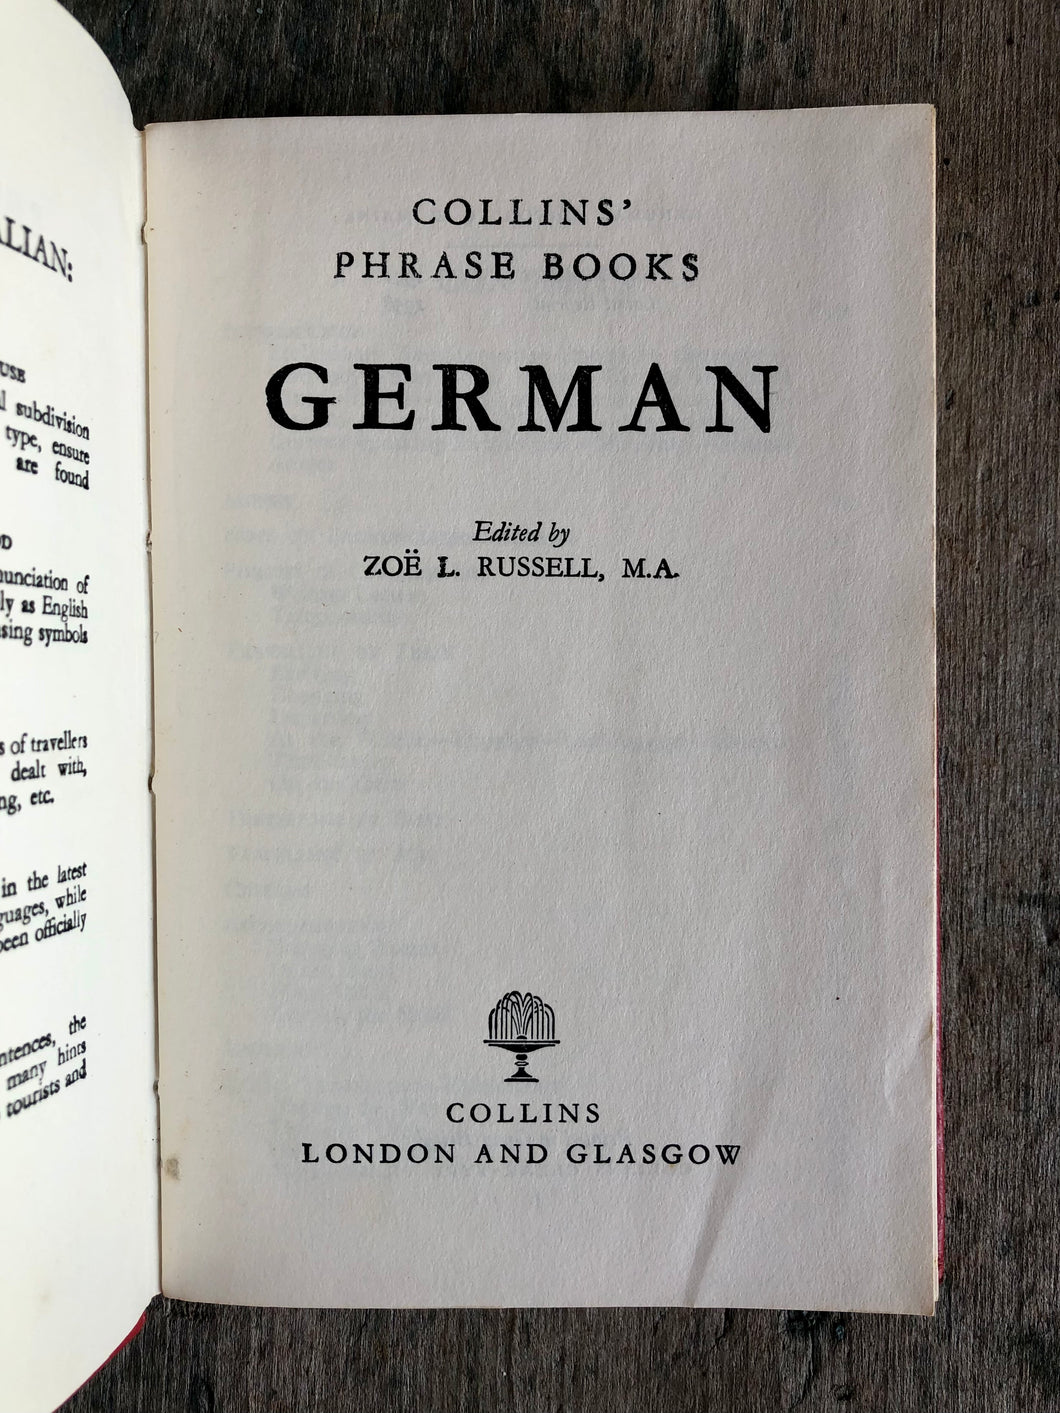 Travel Talk. Collins’ Phrase Books: German edited by Zoë L. Russell